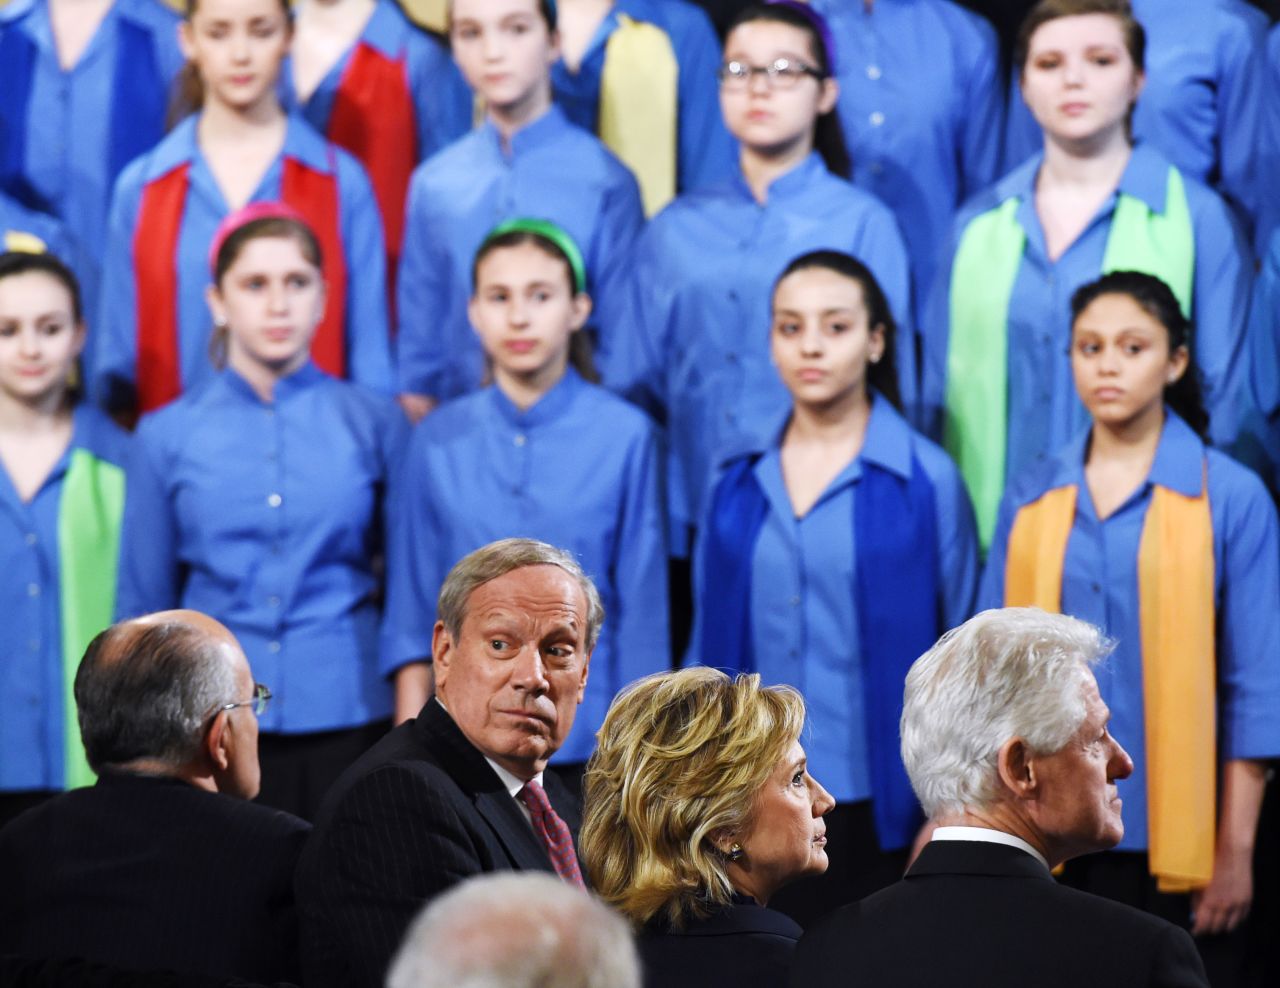 Pataki was elected governor in 1994 and reelected twice after. From left to right, former New York City Mayor Rudy Giuliani, Pataki, former Secretary of State Hillary Clinton and former U.S. President Bill Clinton attend the opening ceremony for the National September 11 Memorial Museum at ground zero May 15, 2014 in New York City. 